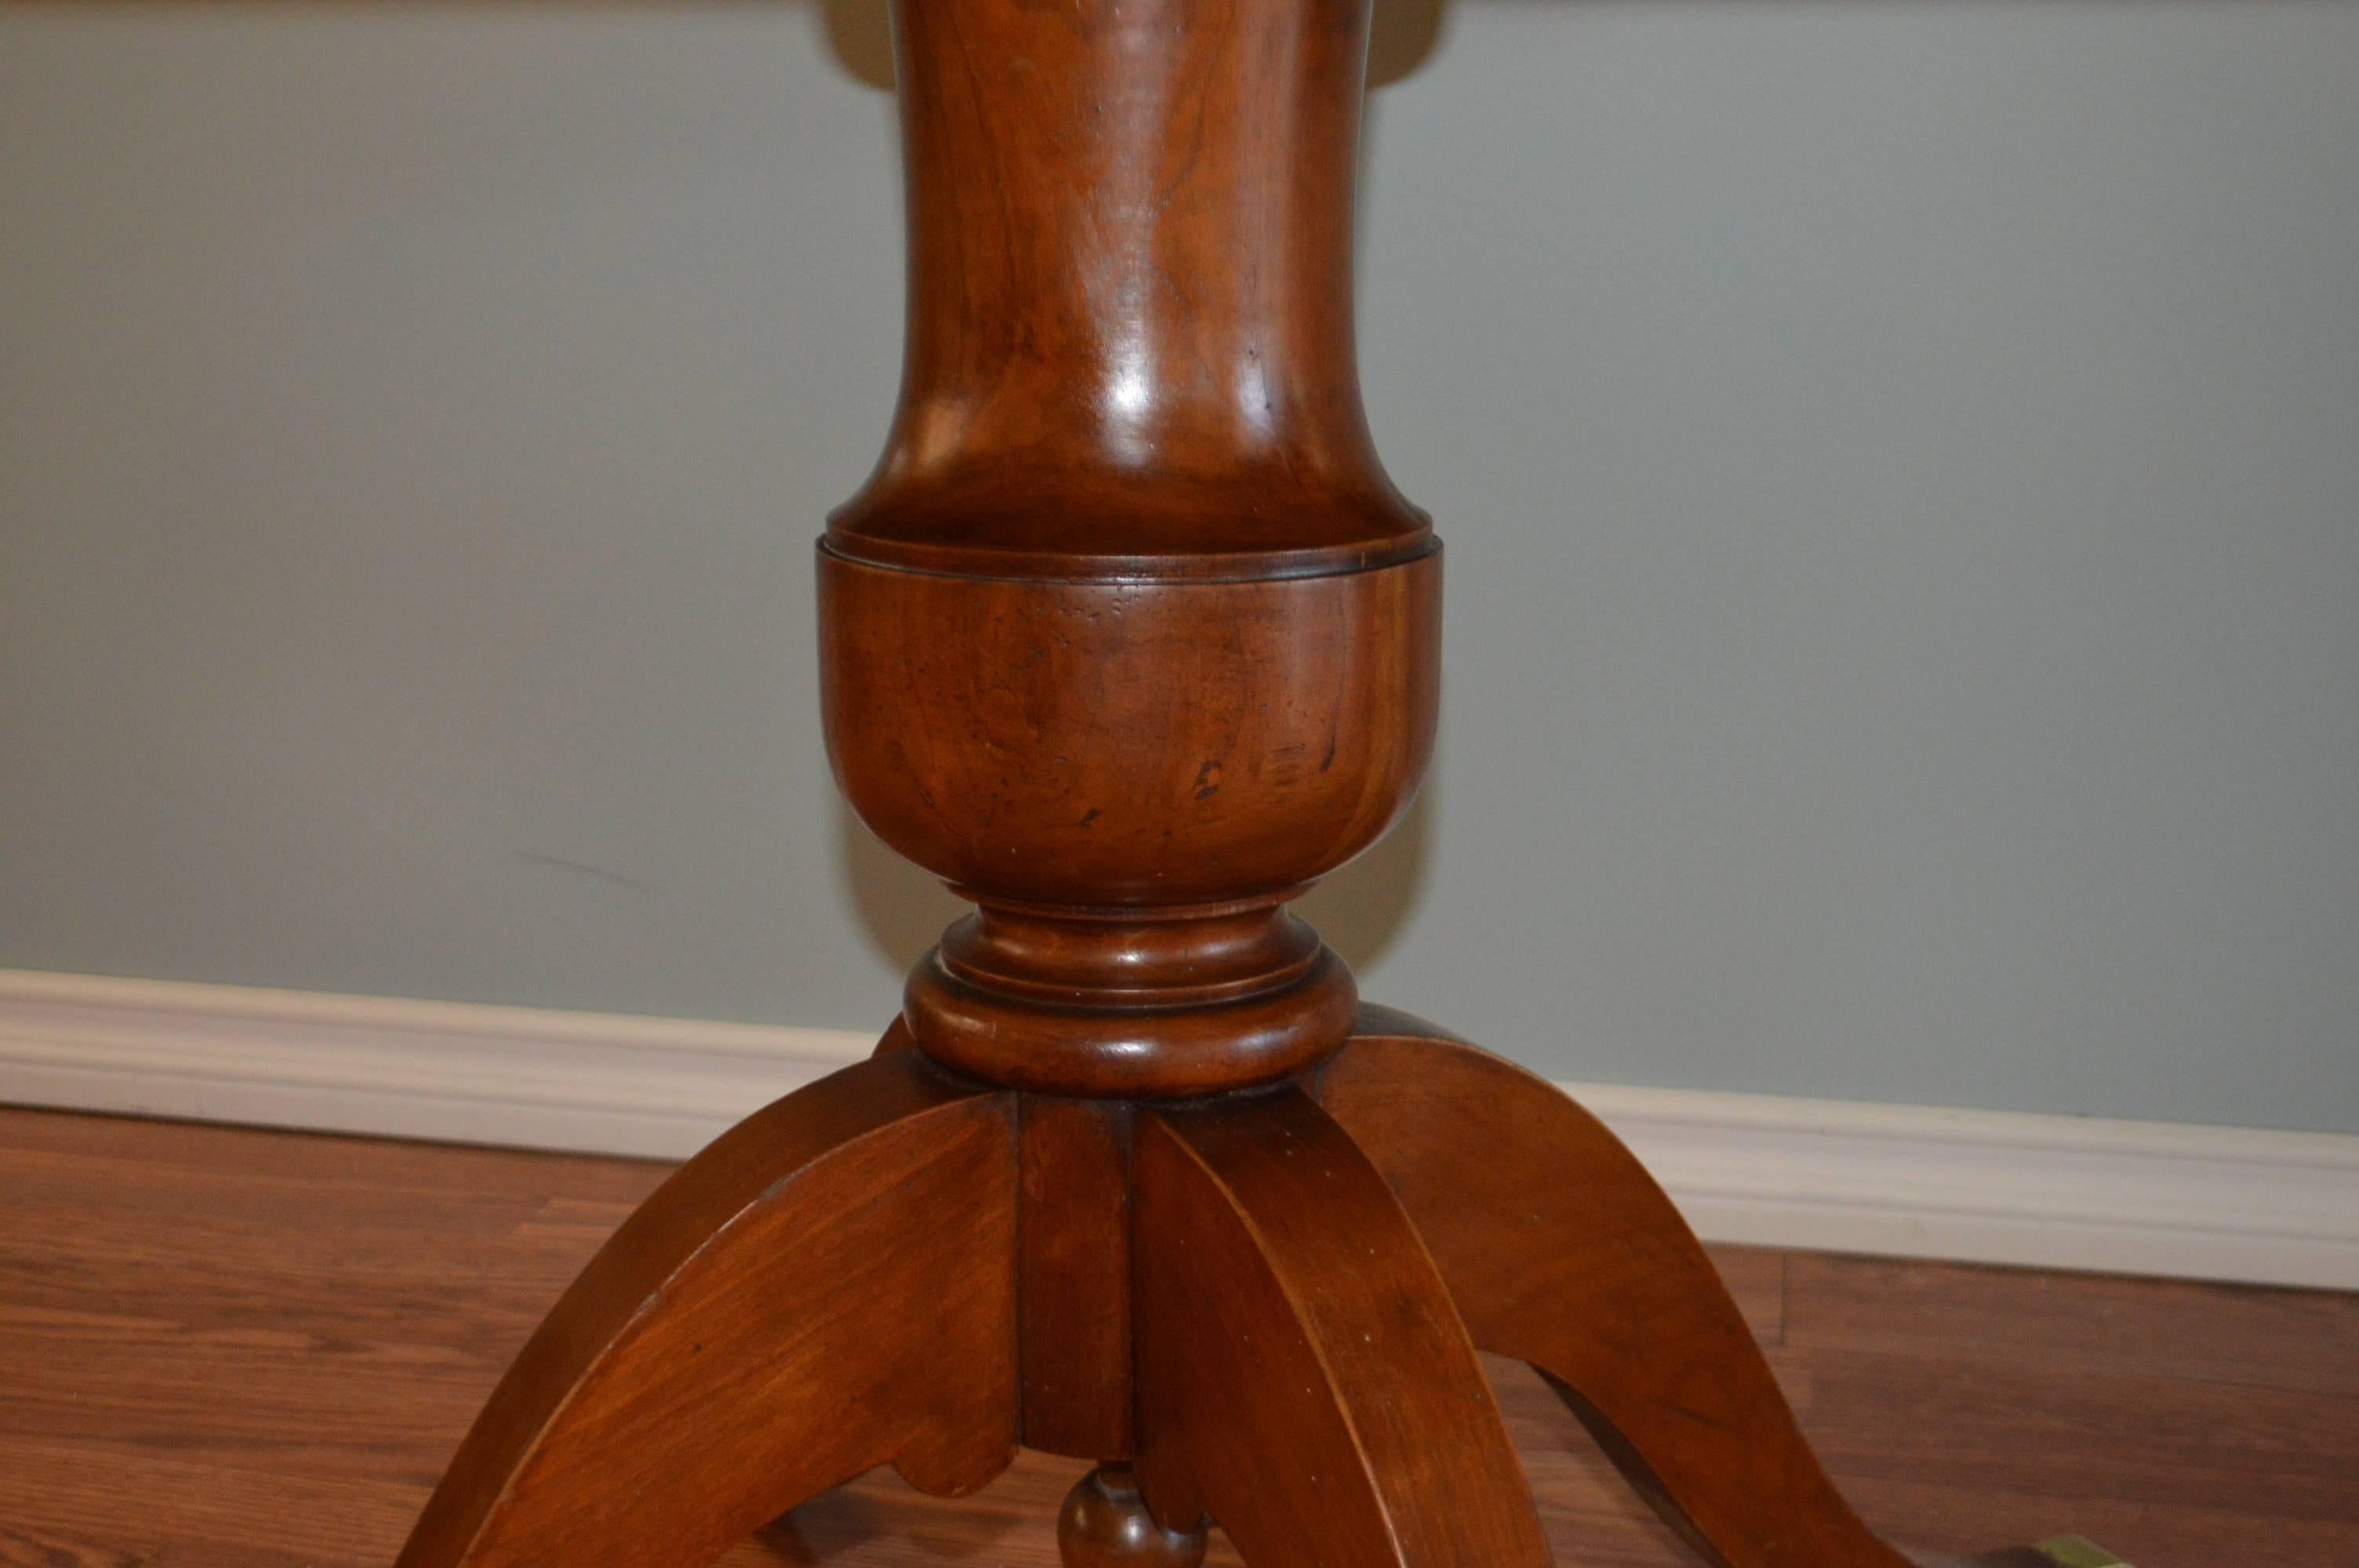 Warm patina on this Louis Philippe style walnut round table. The center pedestal is made of solid walnut and the four feet have brass plates. Great as is for a breakfast table or entrance table.
There are three leaves of 19 1/2